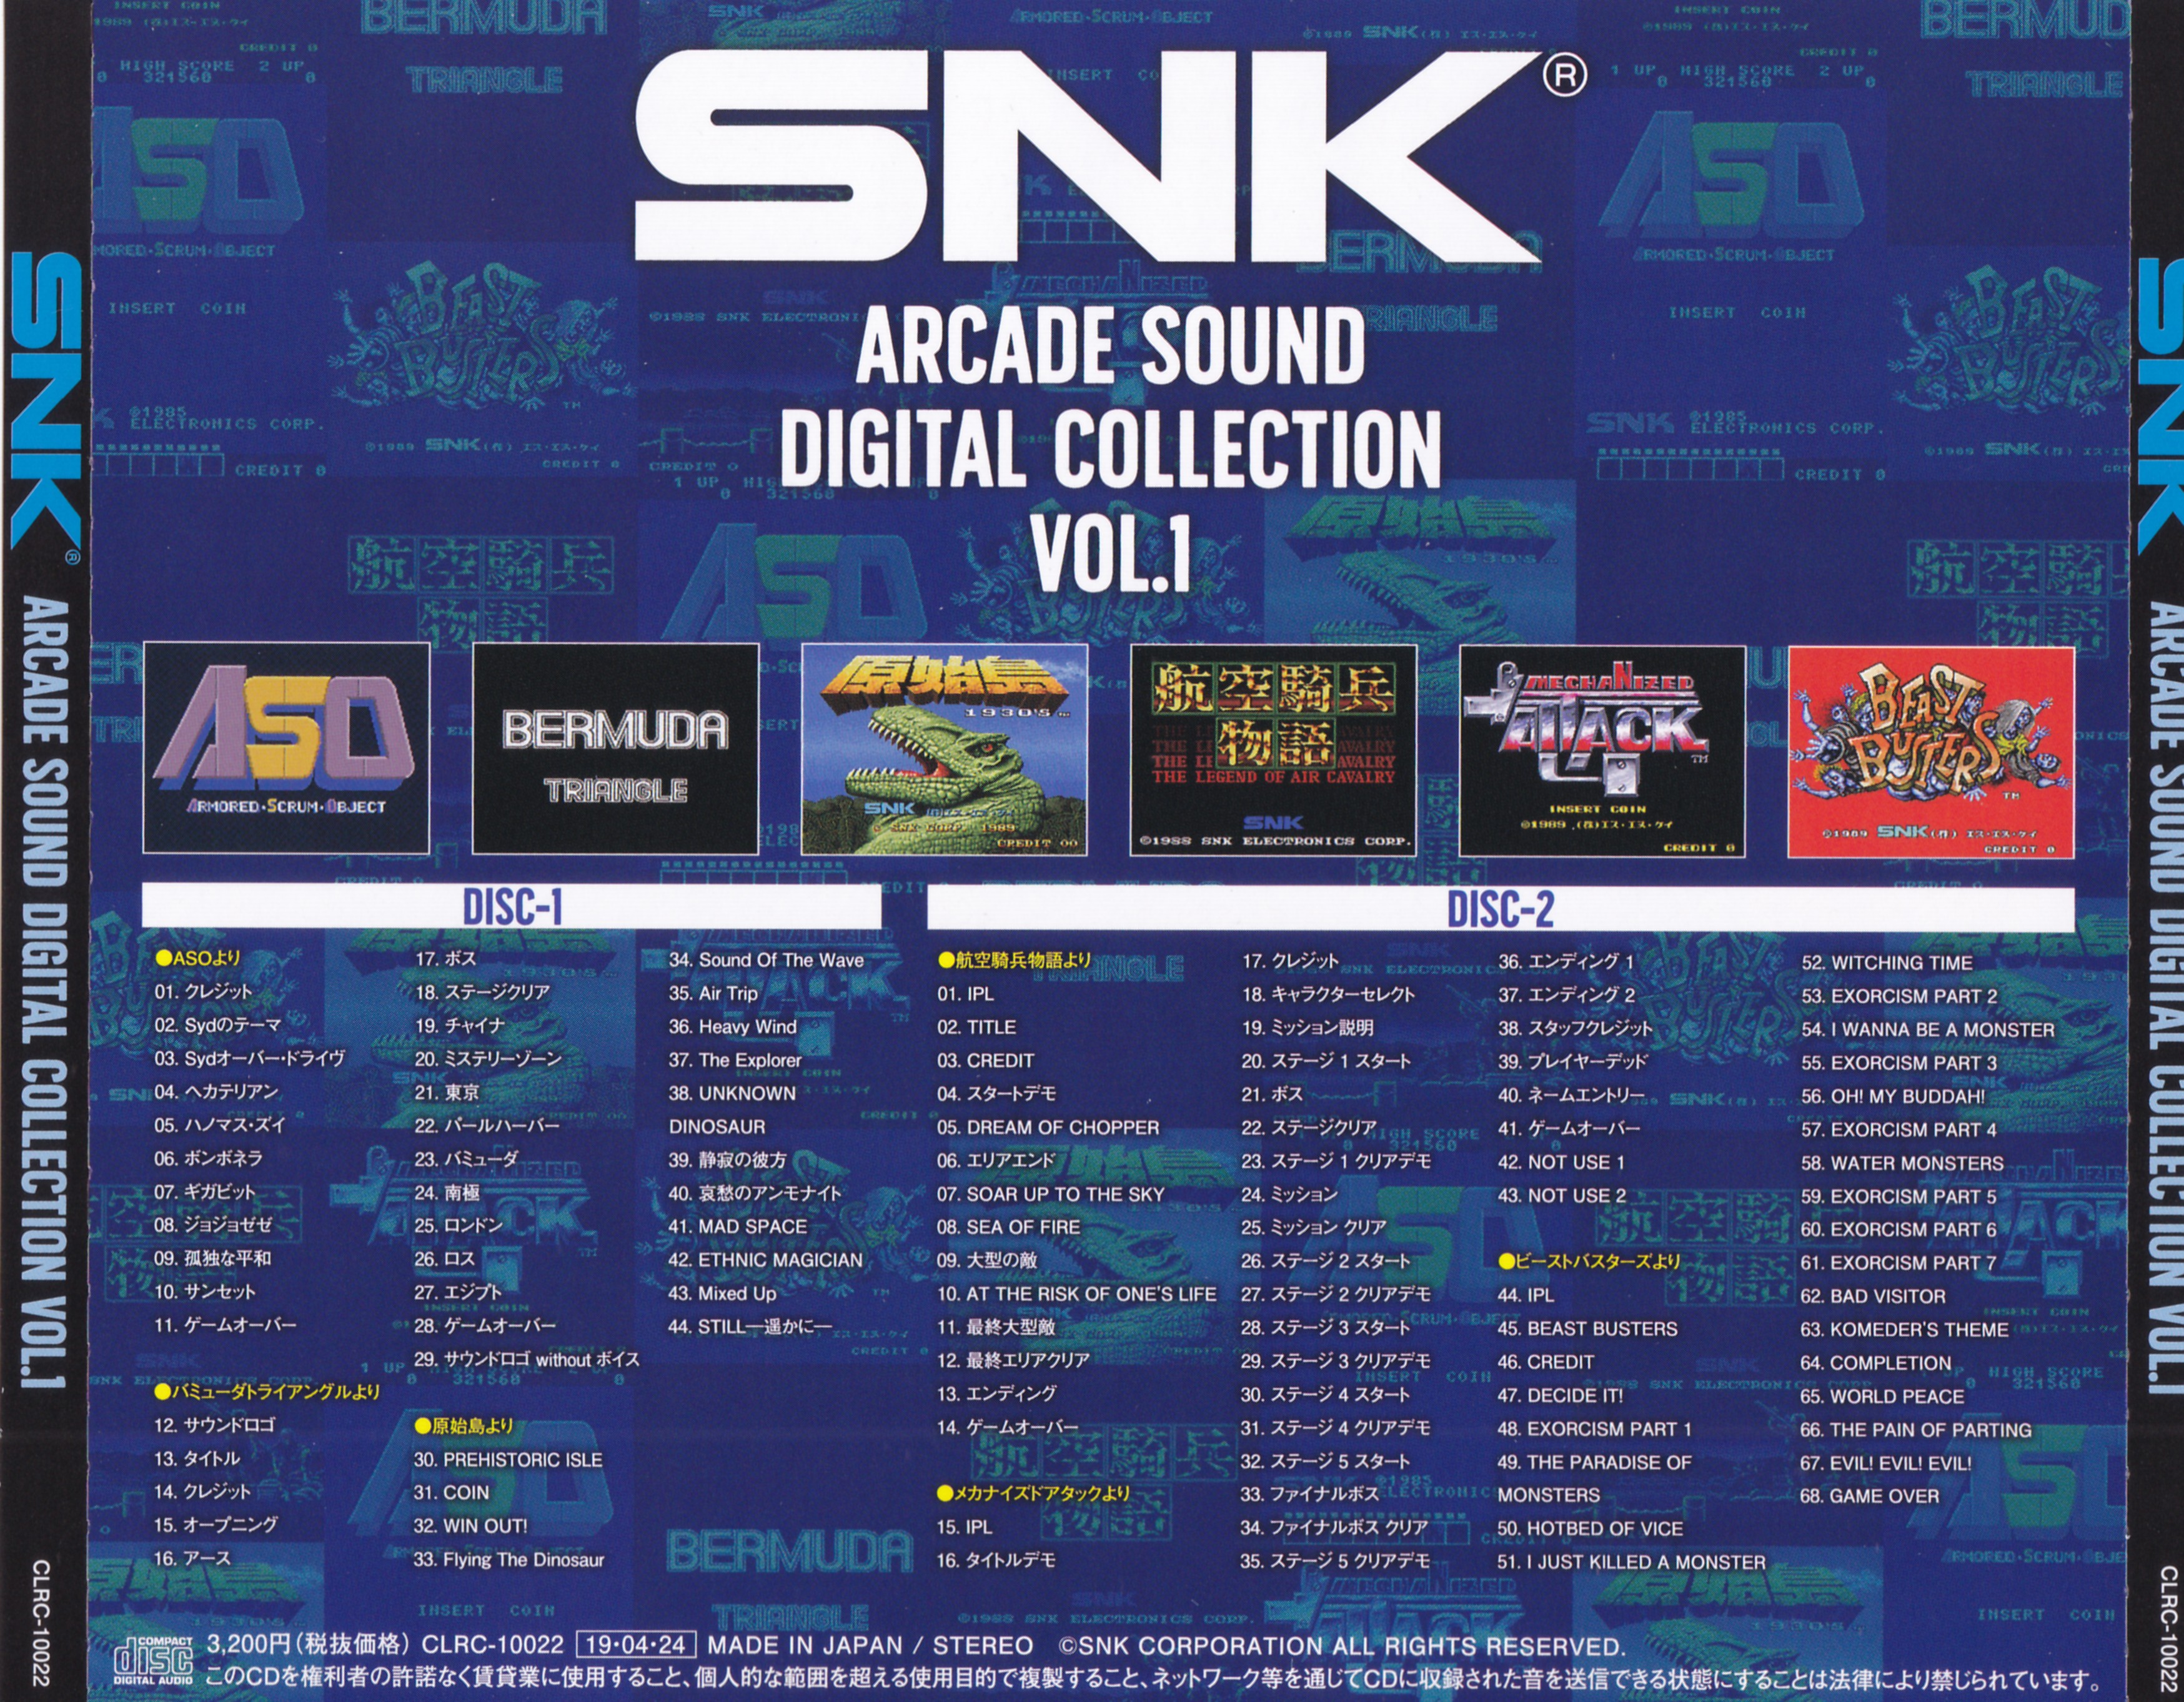 SNK ARCADE SOUND DIGITAL COLLECTION VOL.1 (2019) MP3 - Download SNK ARCADE  SOUND DIGITAL COLLECTION VOL.1 (2019) Soundtracks for FREE!